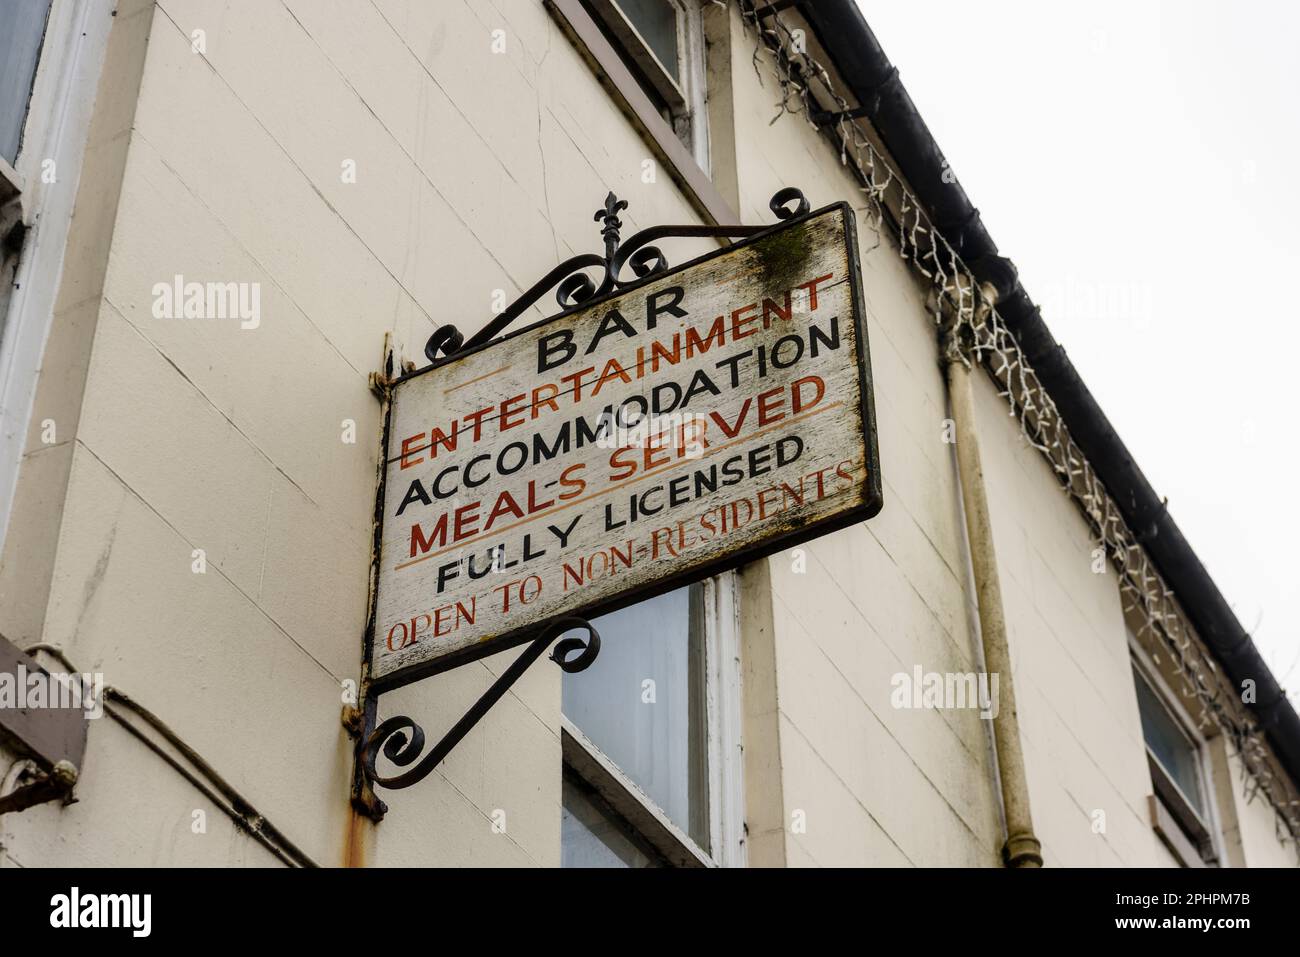 Sign outside a derelict hotel saying 'Bar, Entertainment, Accommodation, Meals Served, Fully Licenced, Open to Non-Residents' Stock Photo